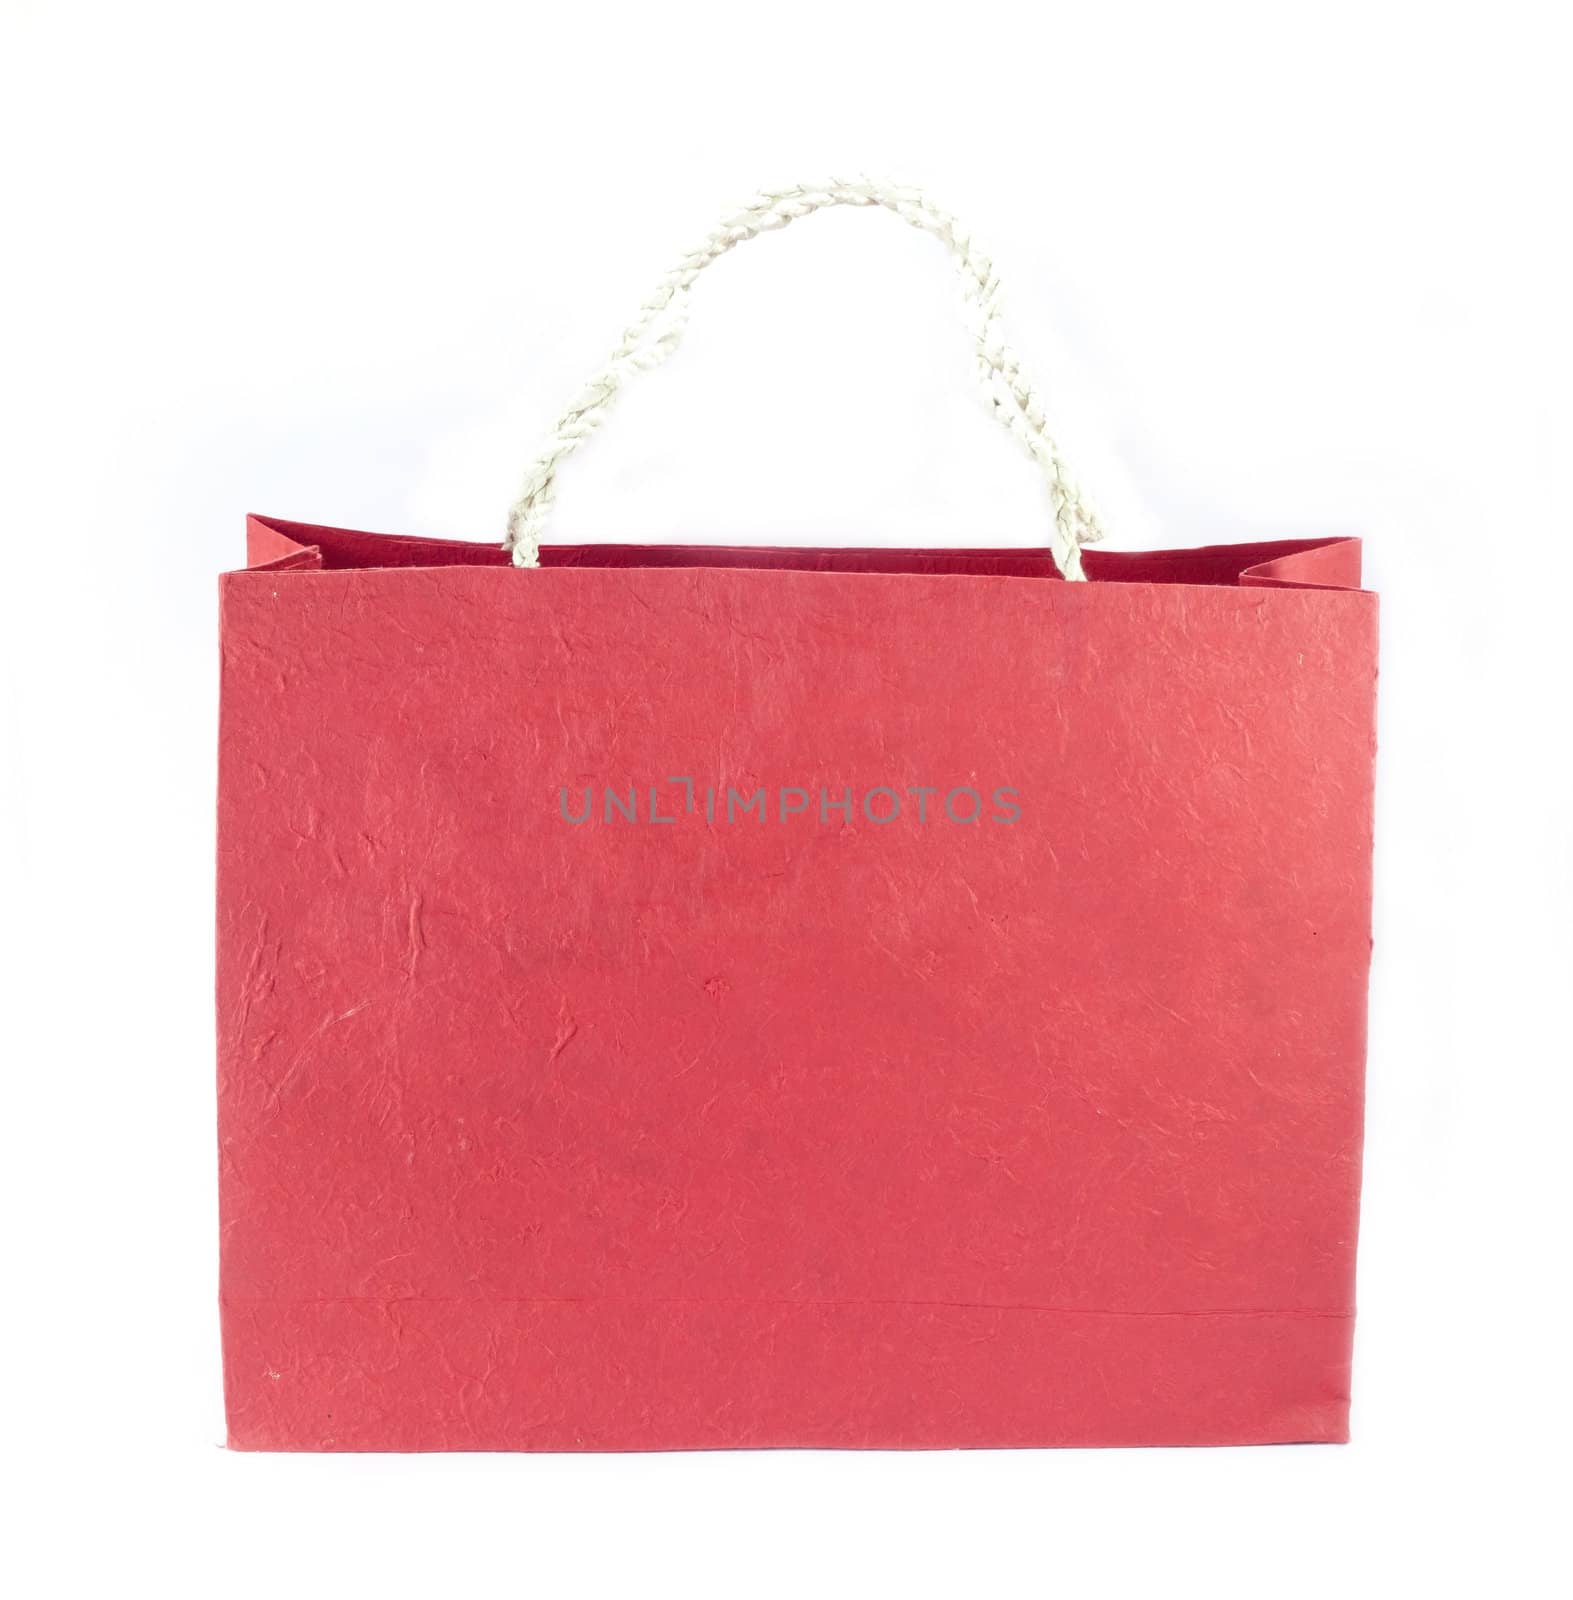 Red Mulberry paper bag by teerawat_camt